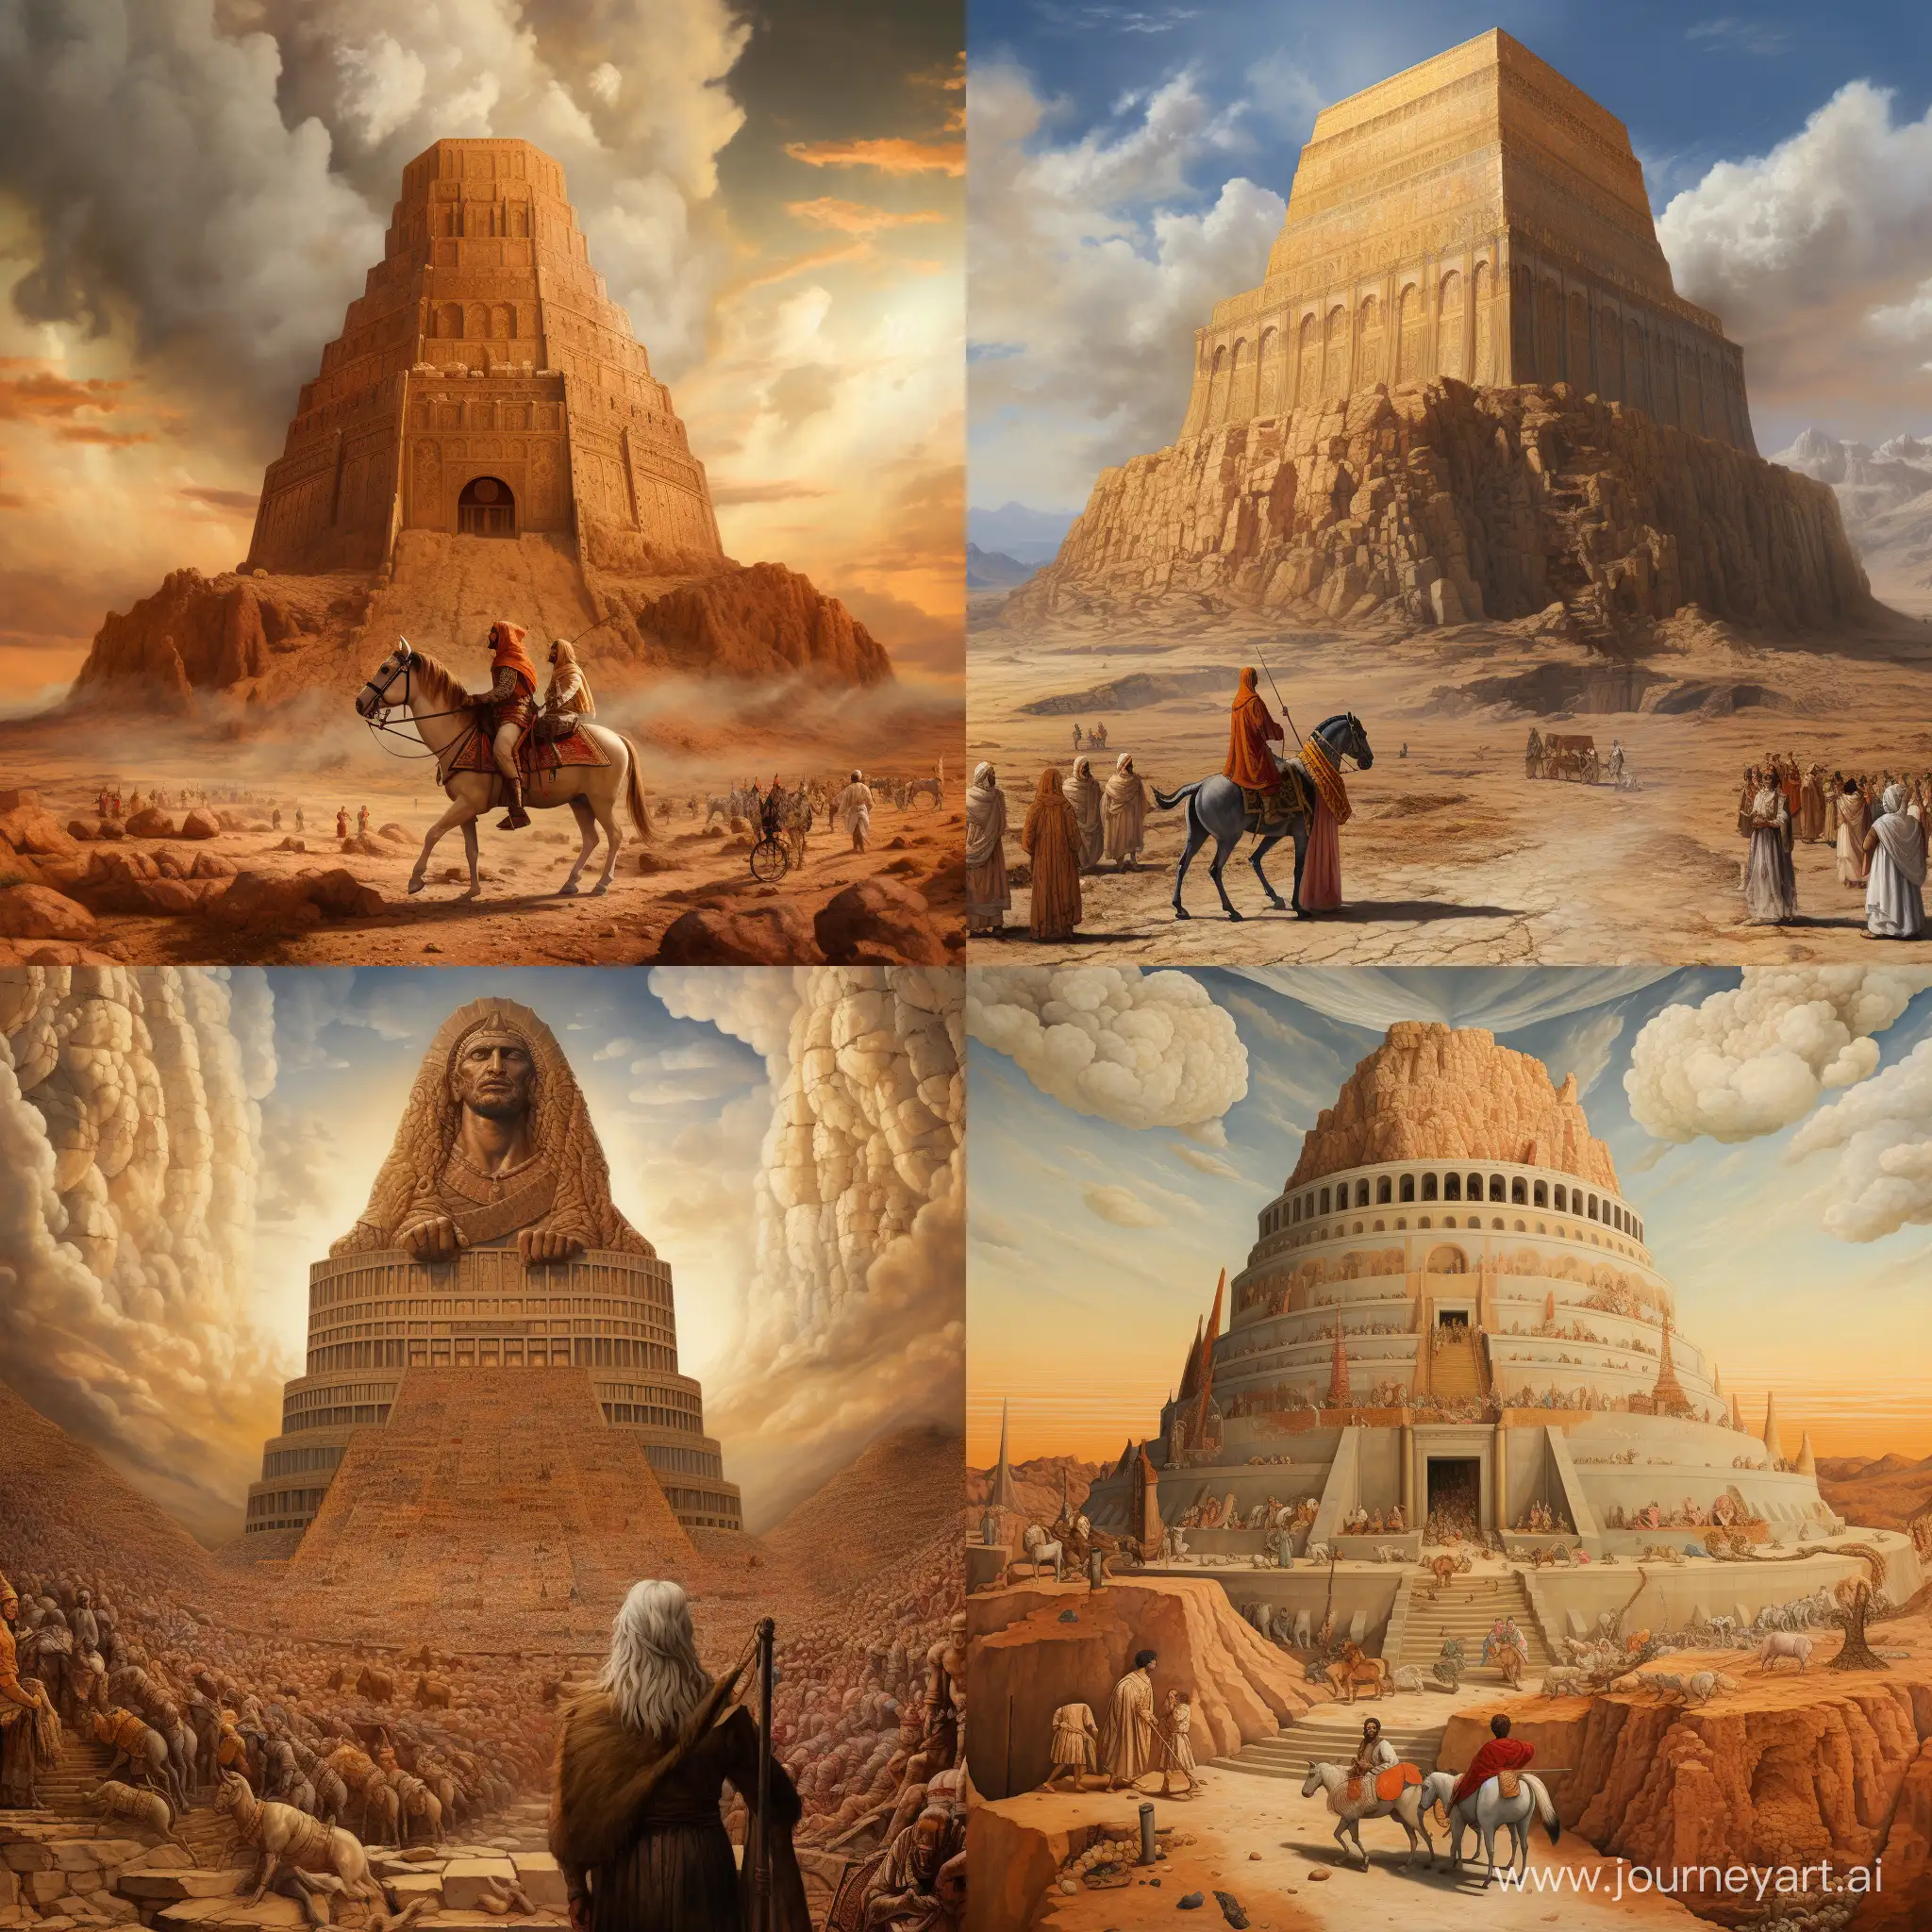 Cyrus-the-Great-Monumental-Presence-in-Babel